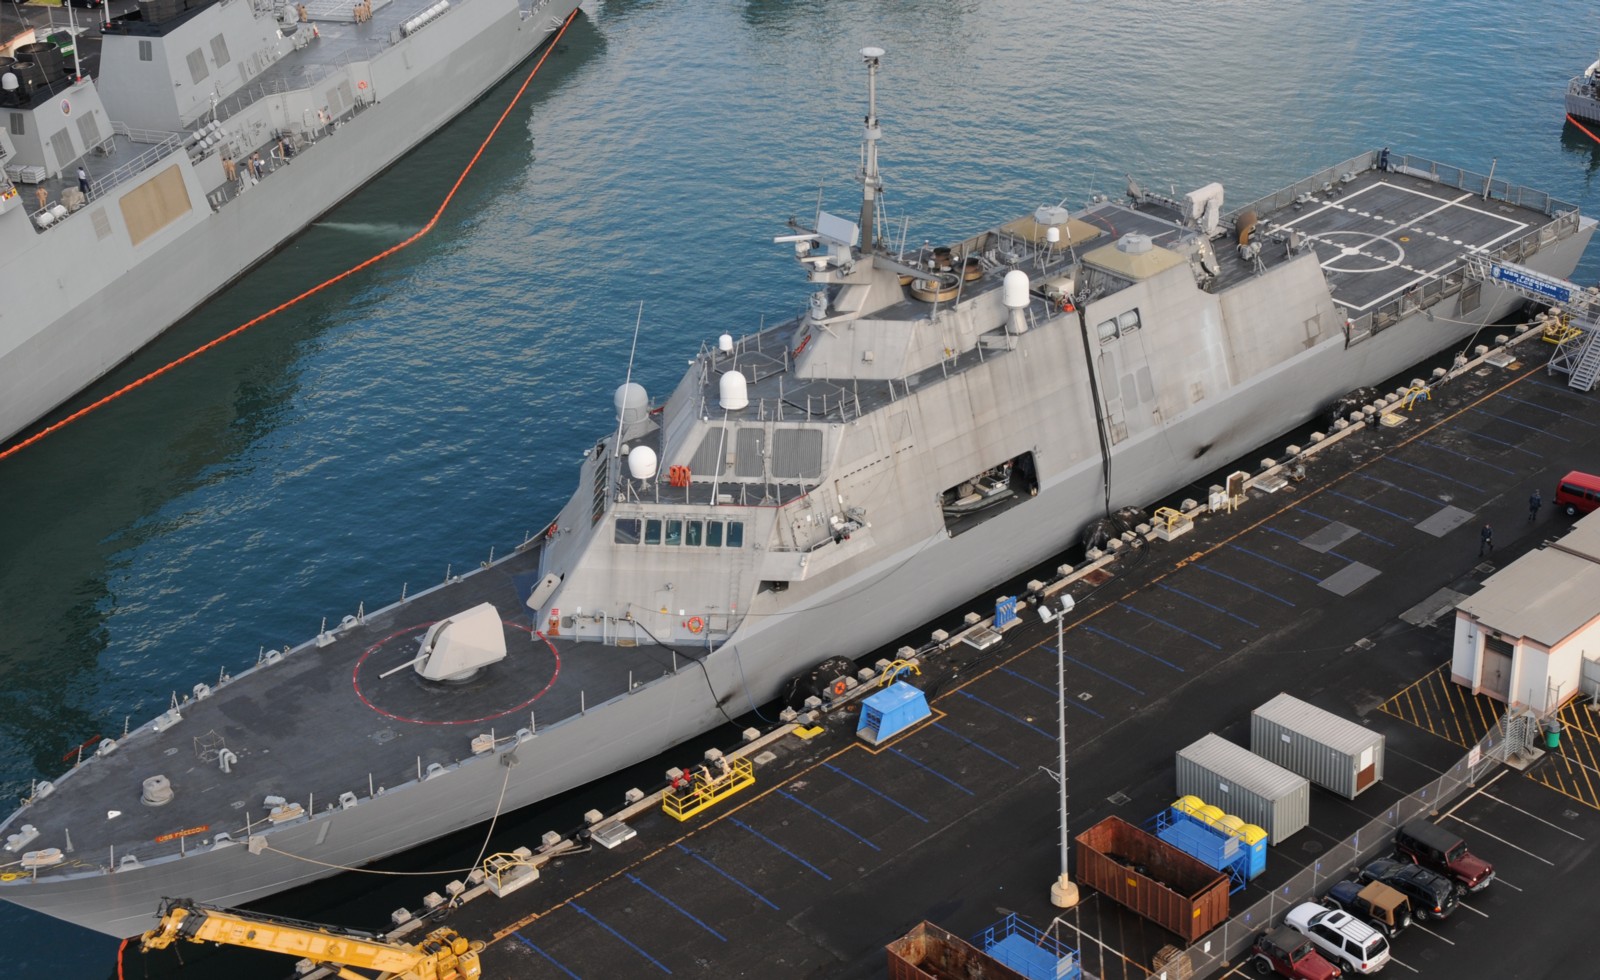 lcs-1 uss freedom class littoral combat ship us navy 76